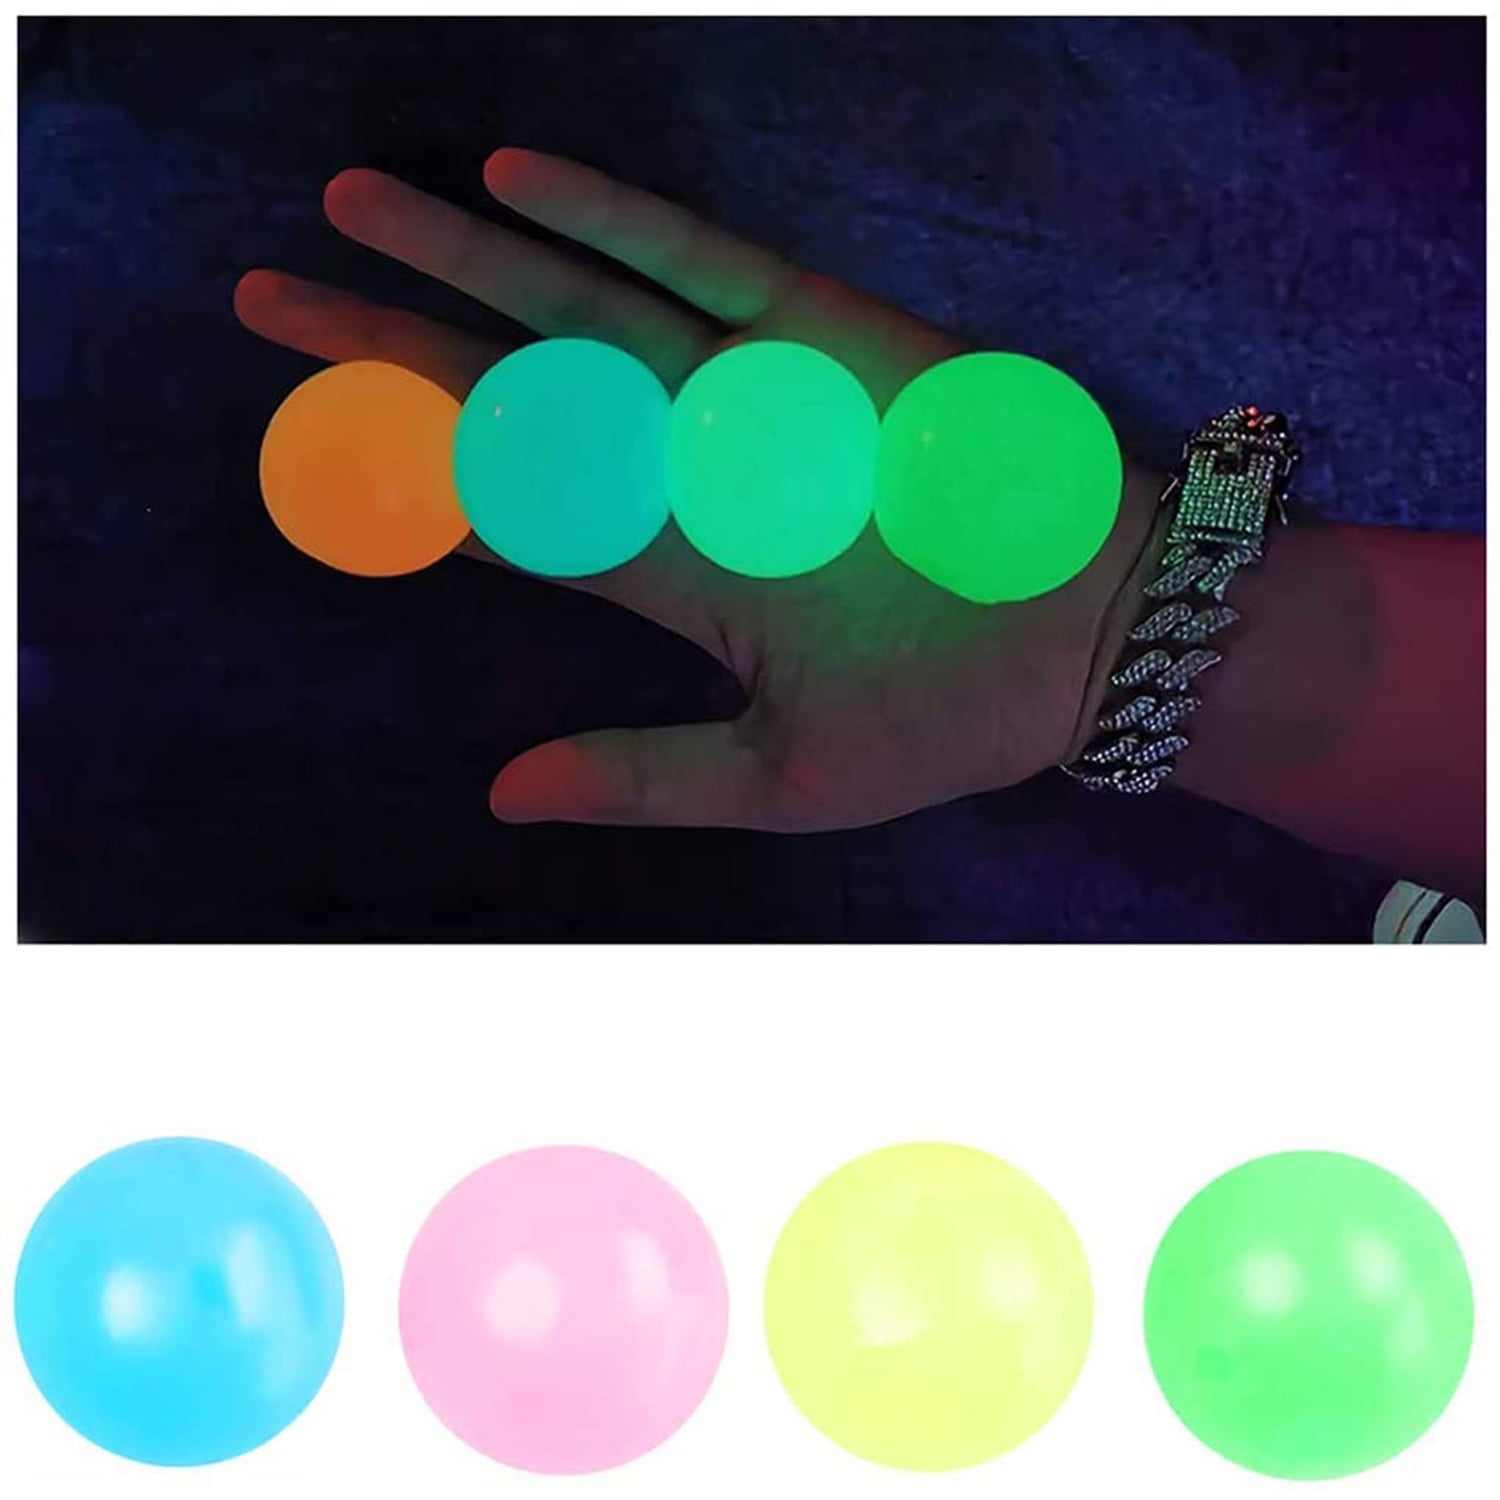 Stick to The Wall and Slowly Fall Off gobbles Sticky Balls Ceiling Sticky Balls Glow Stress Relief Toys for Kids and Adults FRSH MNT Glow Stress Relief Sticky Ball